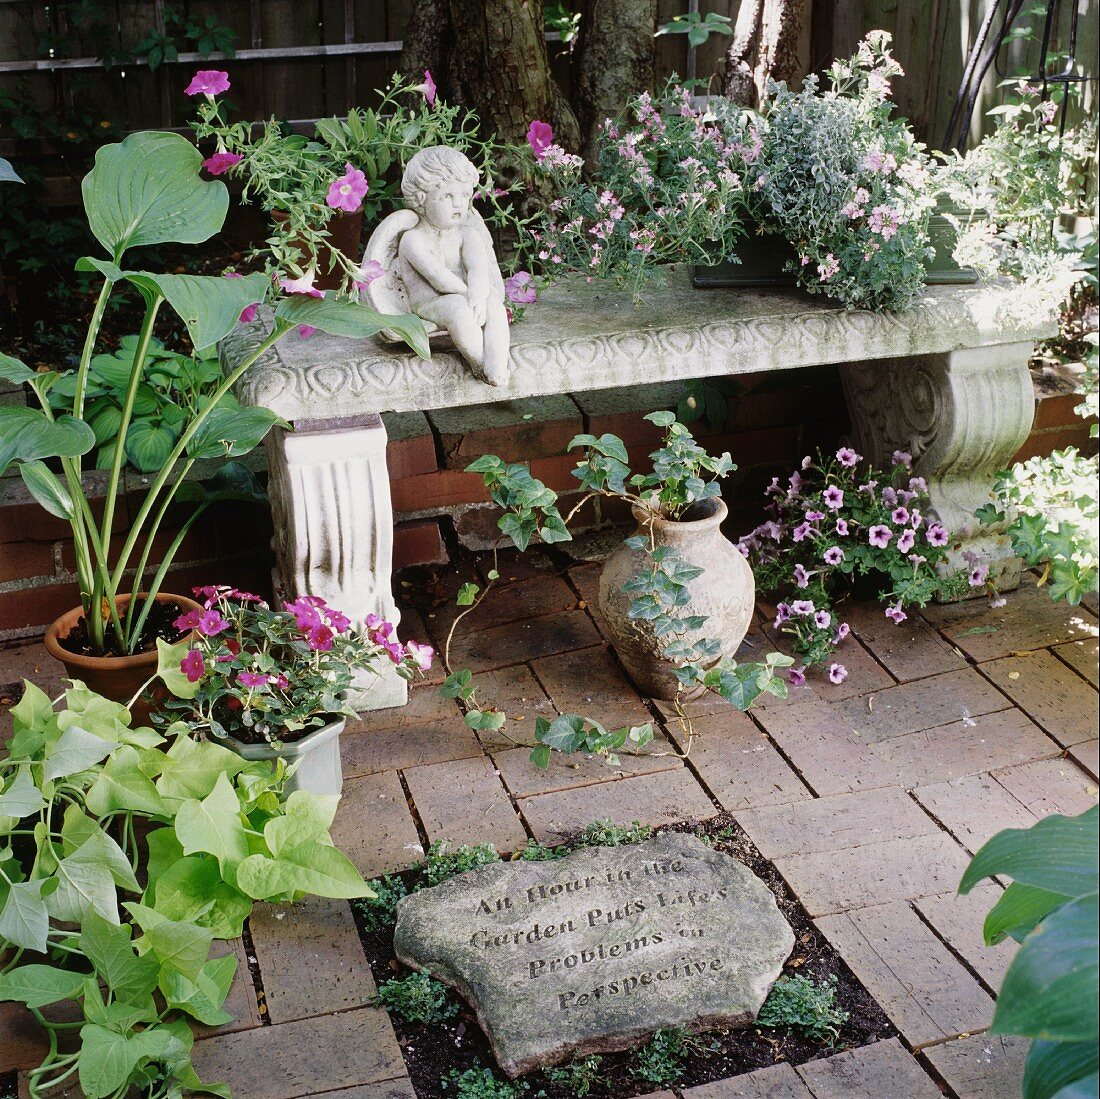 Decorative stone bench with planters and angel figurine